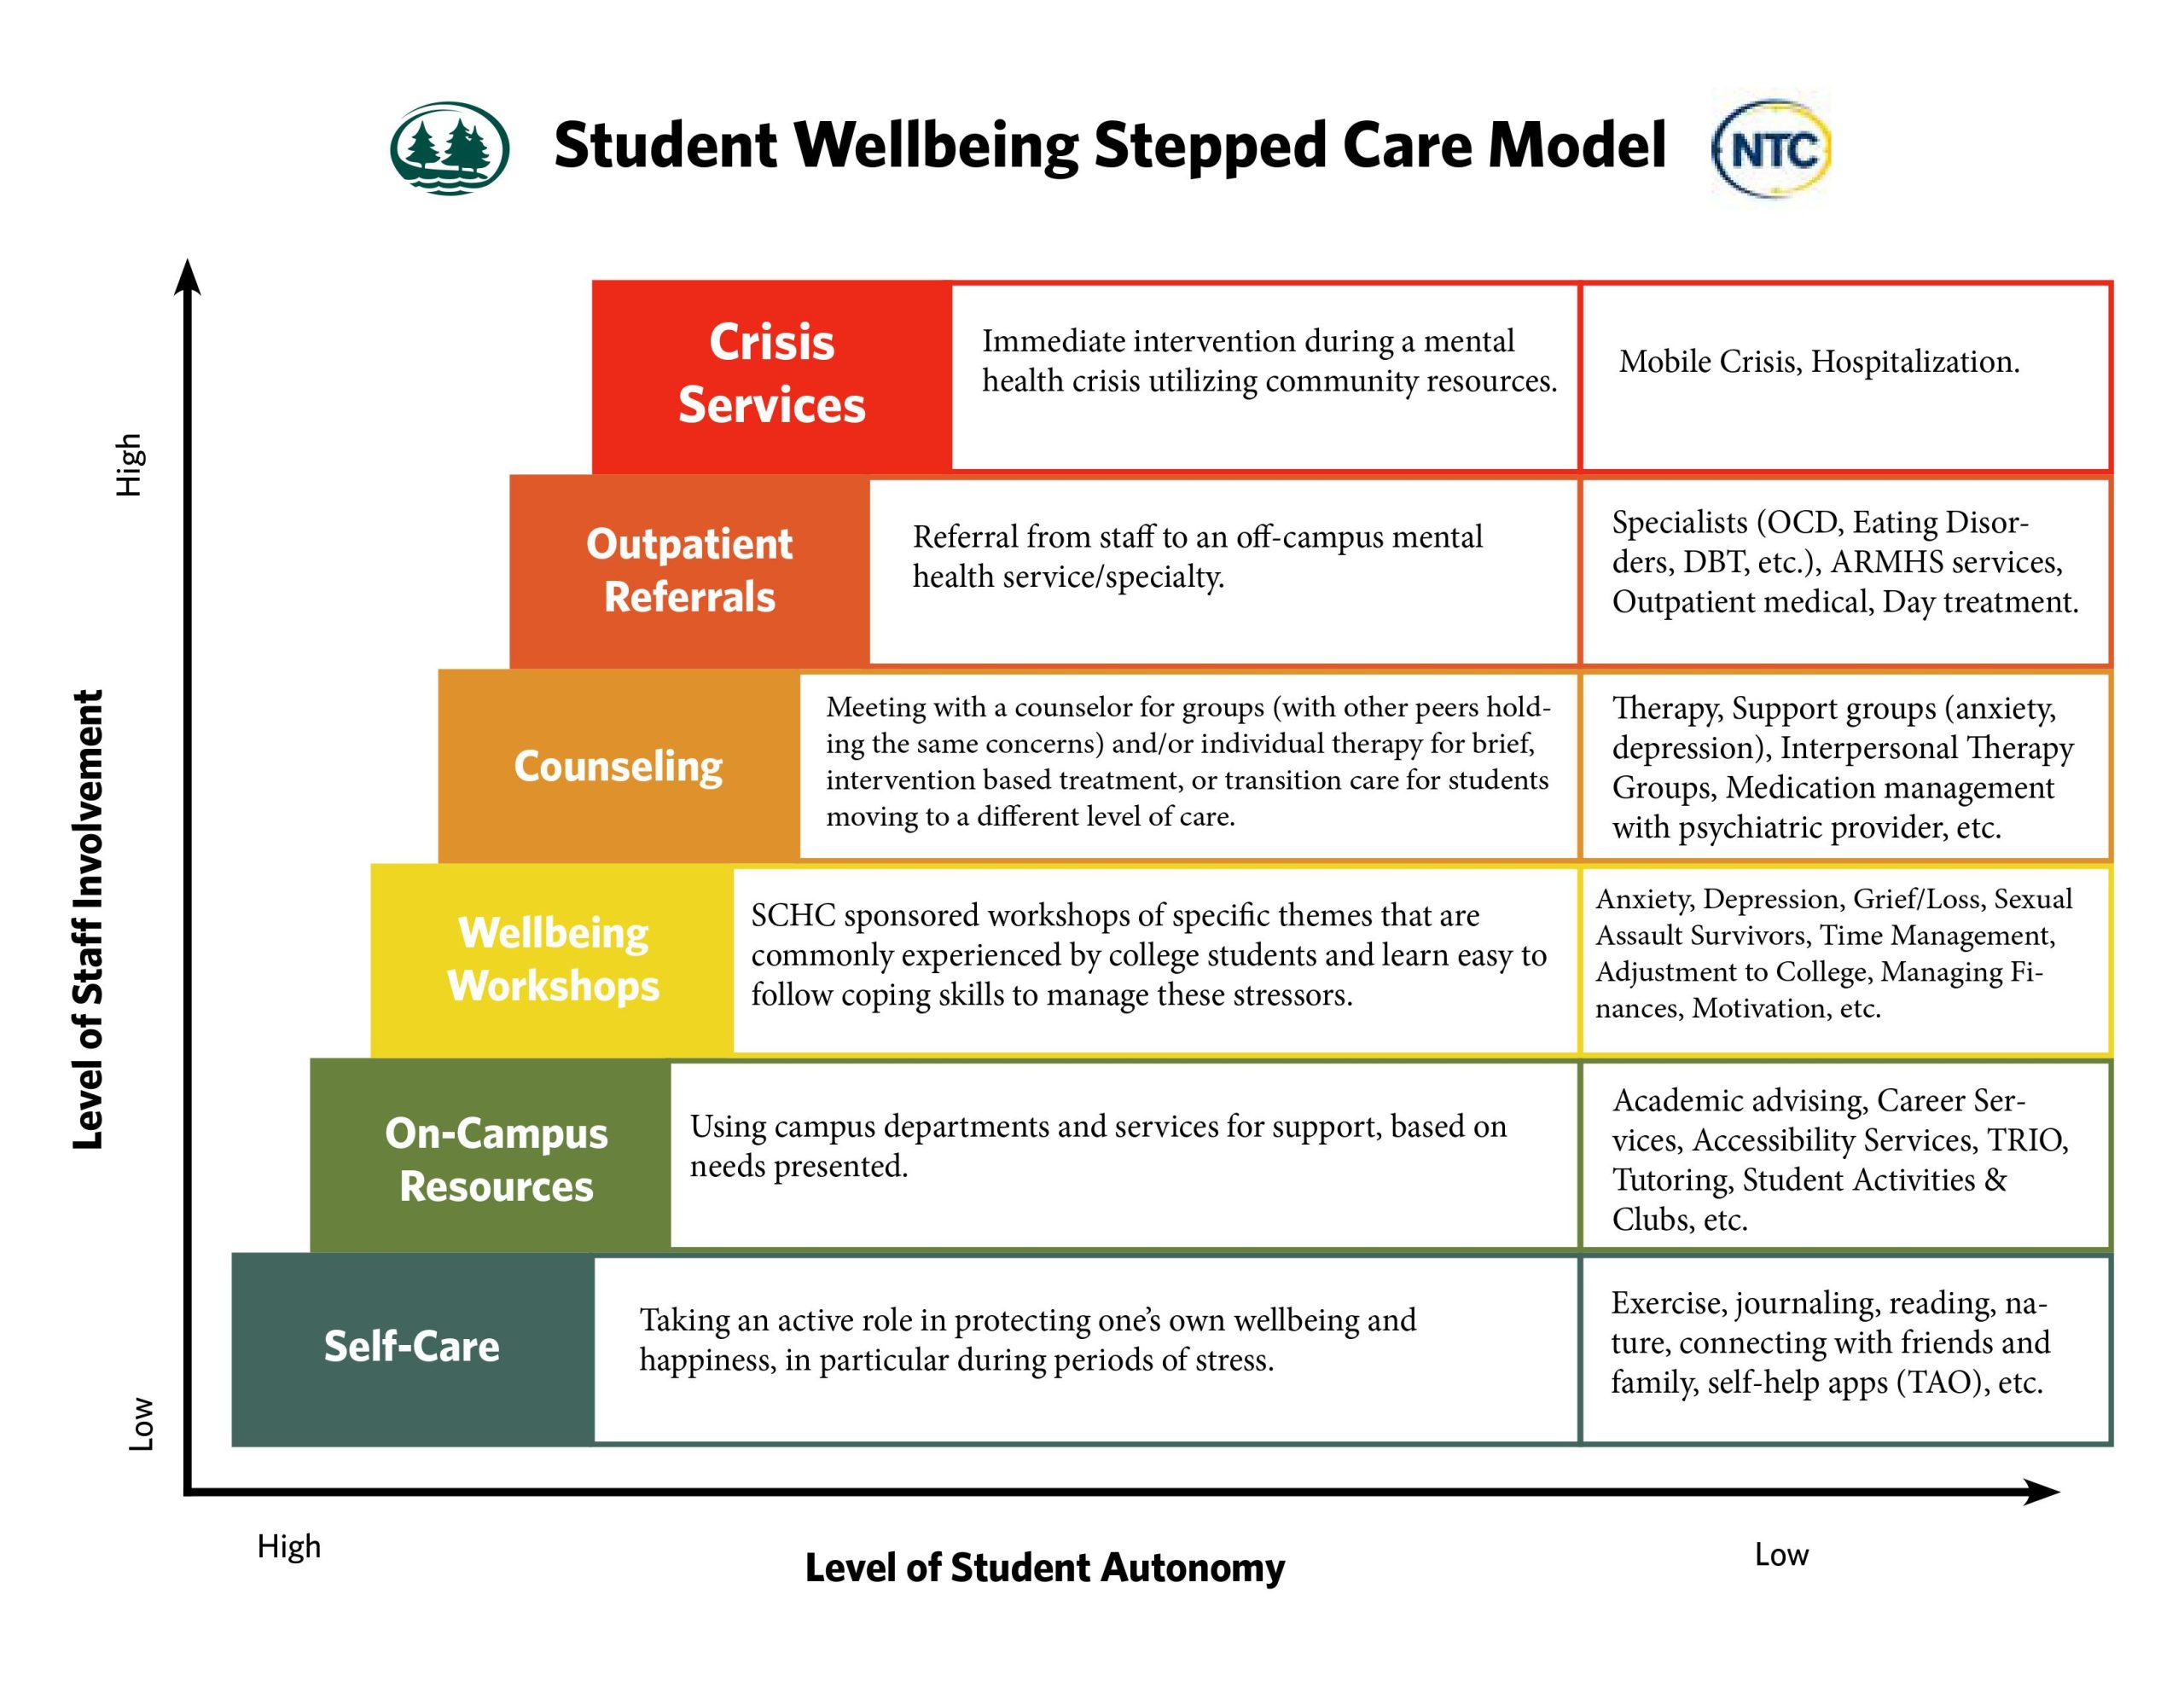 The stepped care model graph shows the escelating level of student in staff involvement from self care, on campus resources, wellbeing workshops, counseling, outpatient refferals and crisis services at the top of the list.